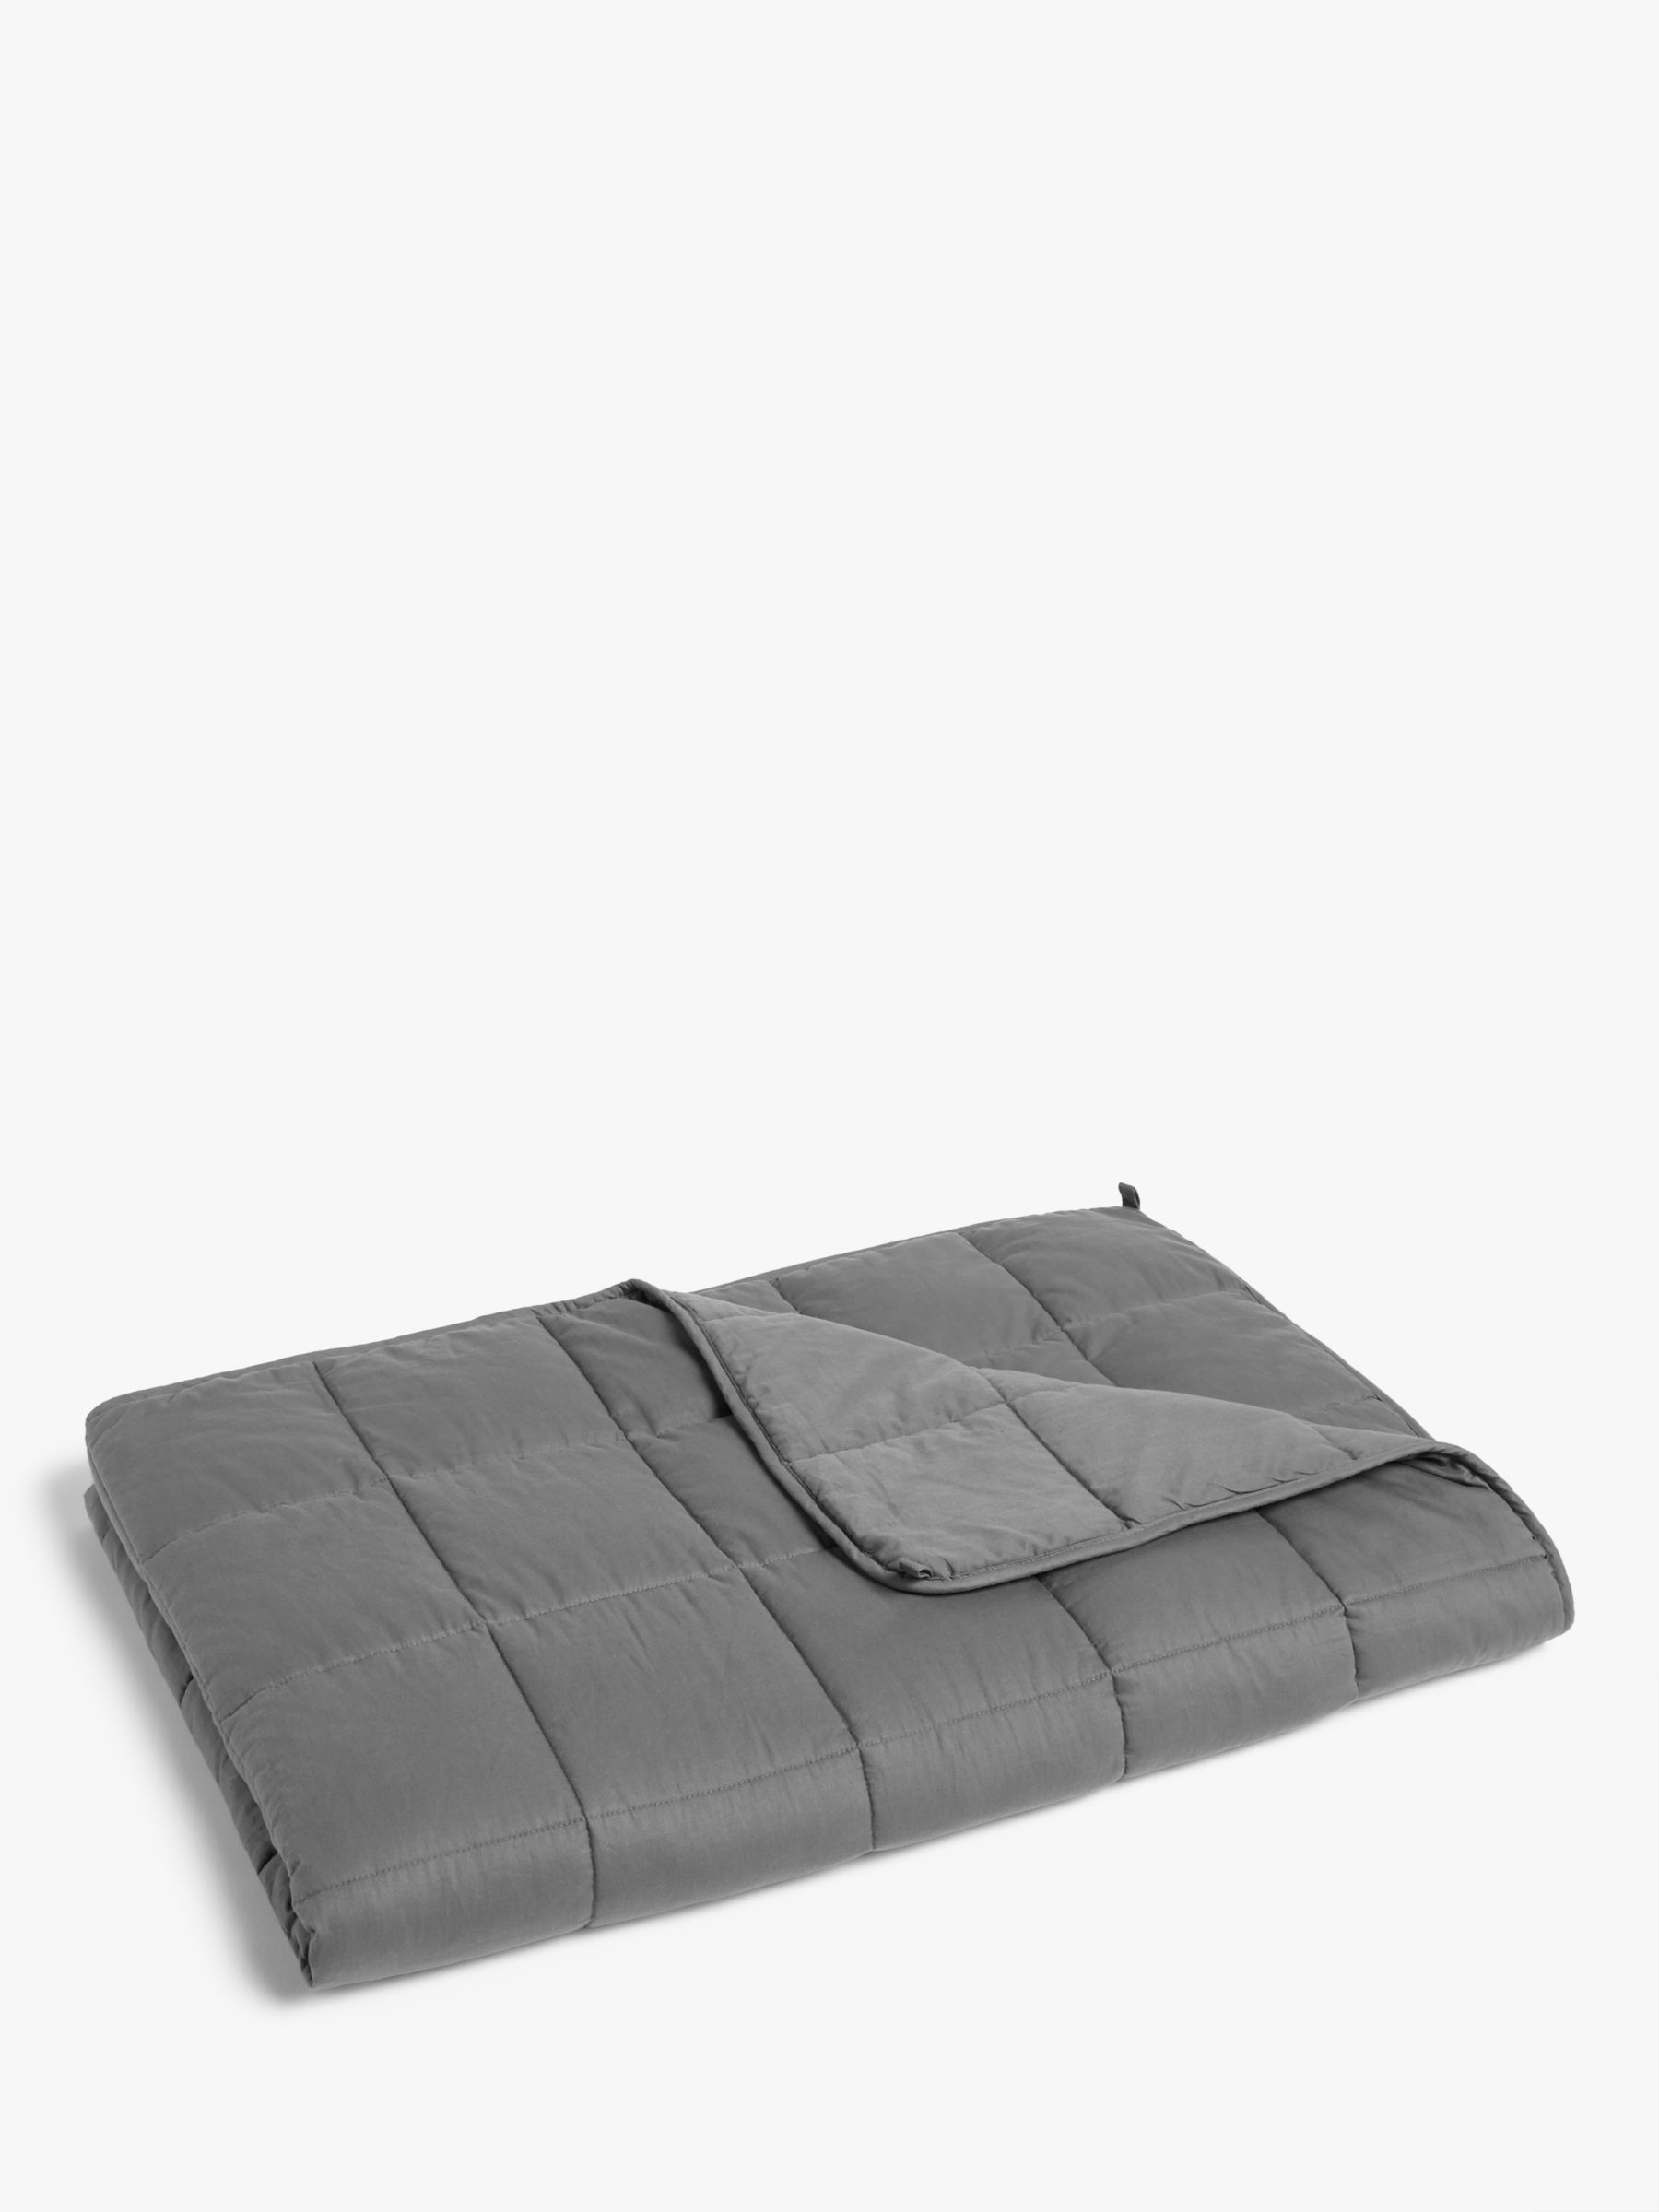 John Lewis & Partners Specialist Synthetic Weighted Blanket at John